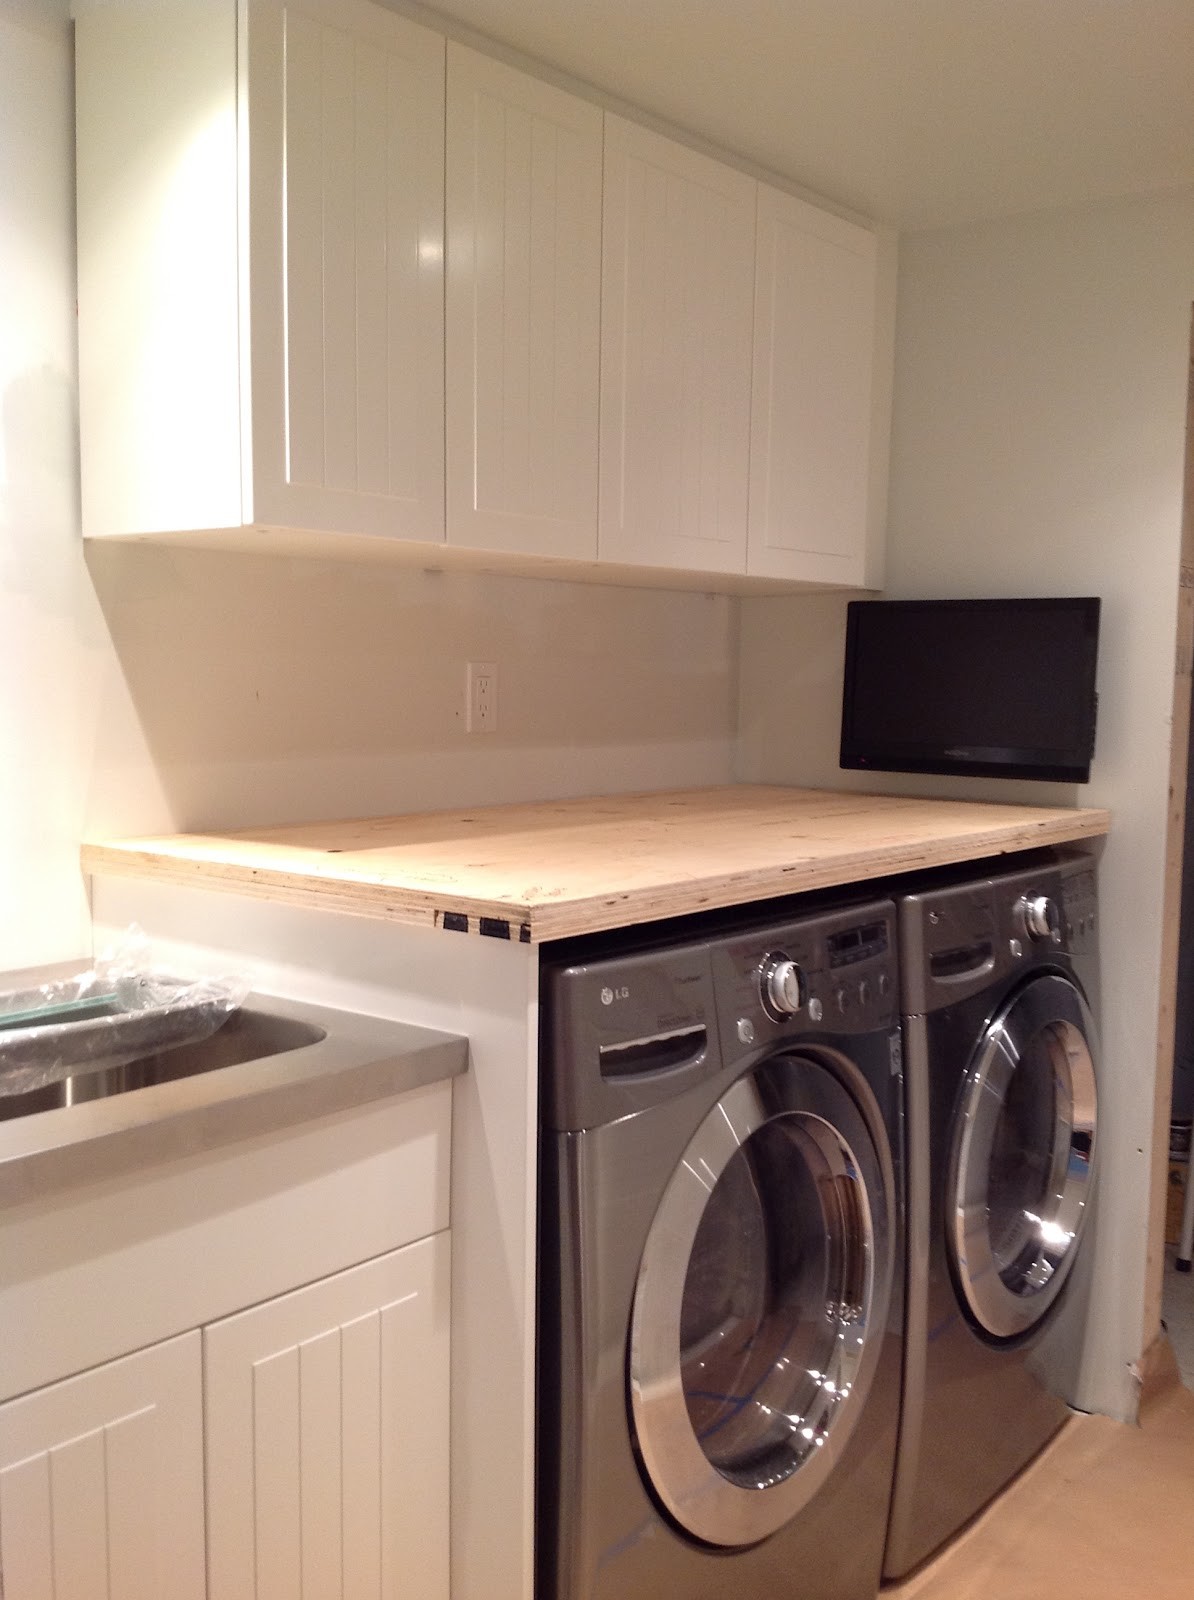 how to build a countertop above washer and dryer
 How To Support A Laundry Room Countertop Over A Washer And ..